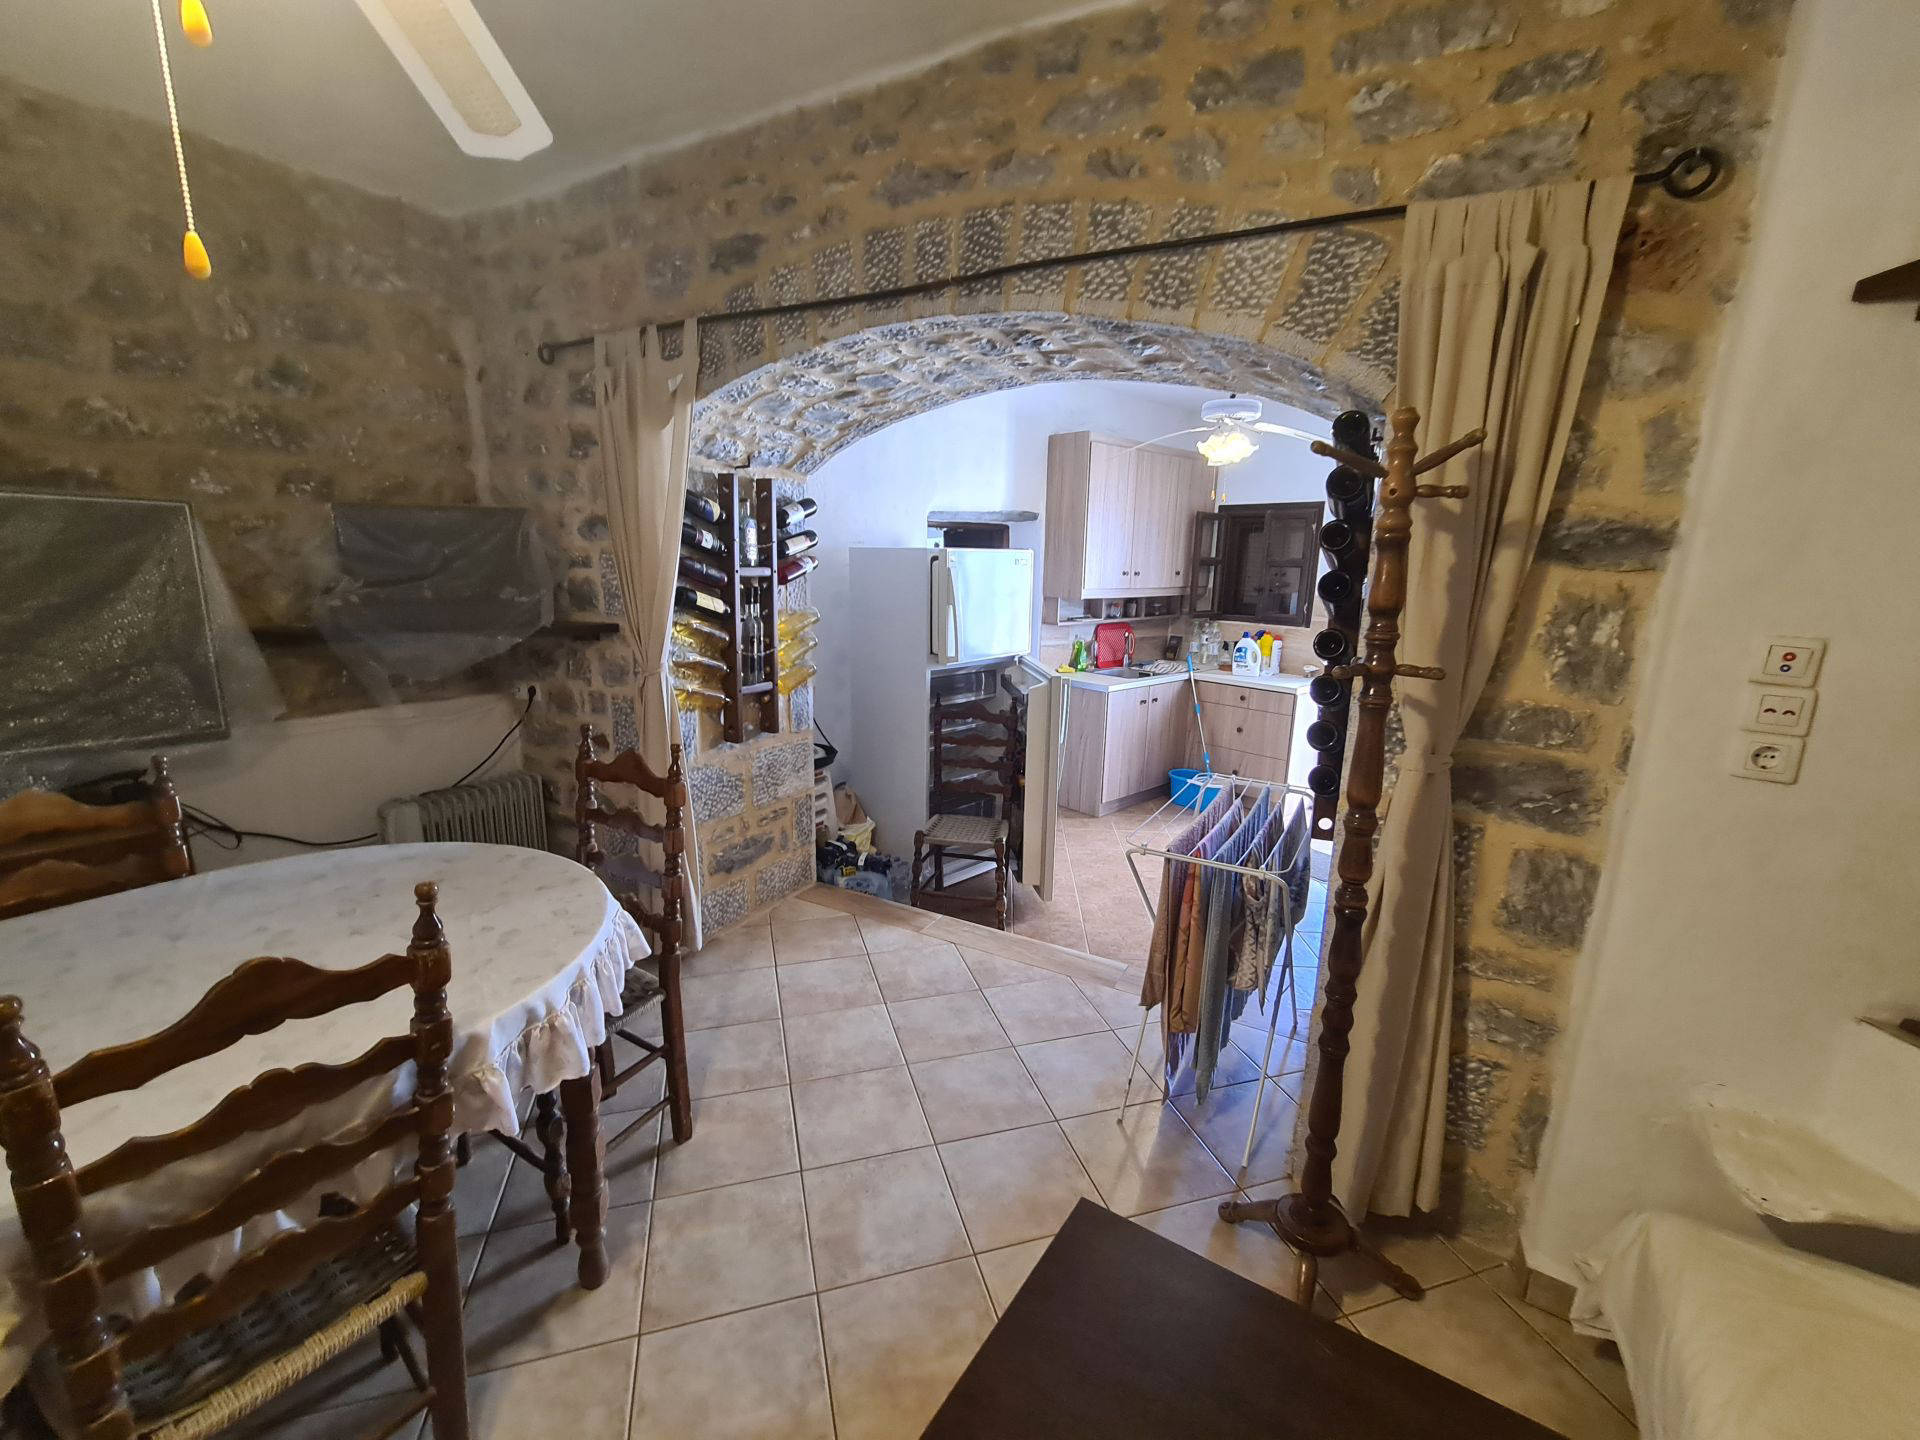 Traditional semi detached village stone house in the Laconian Mani - HaALK723